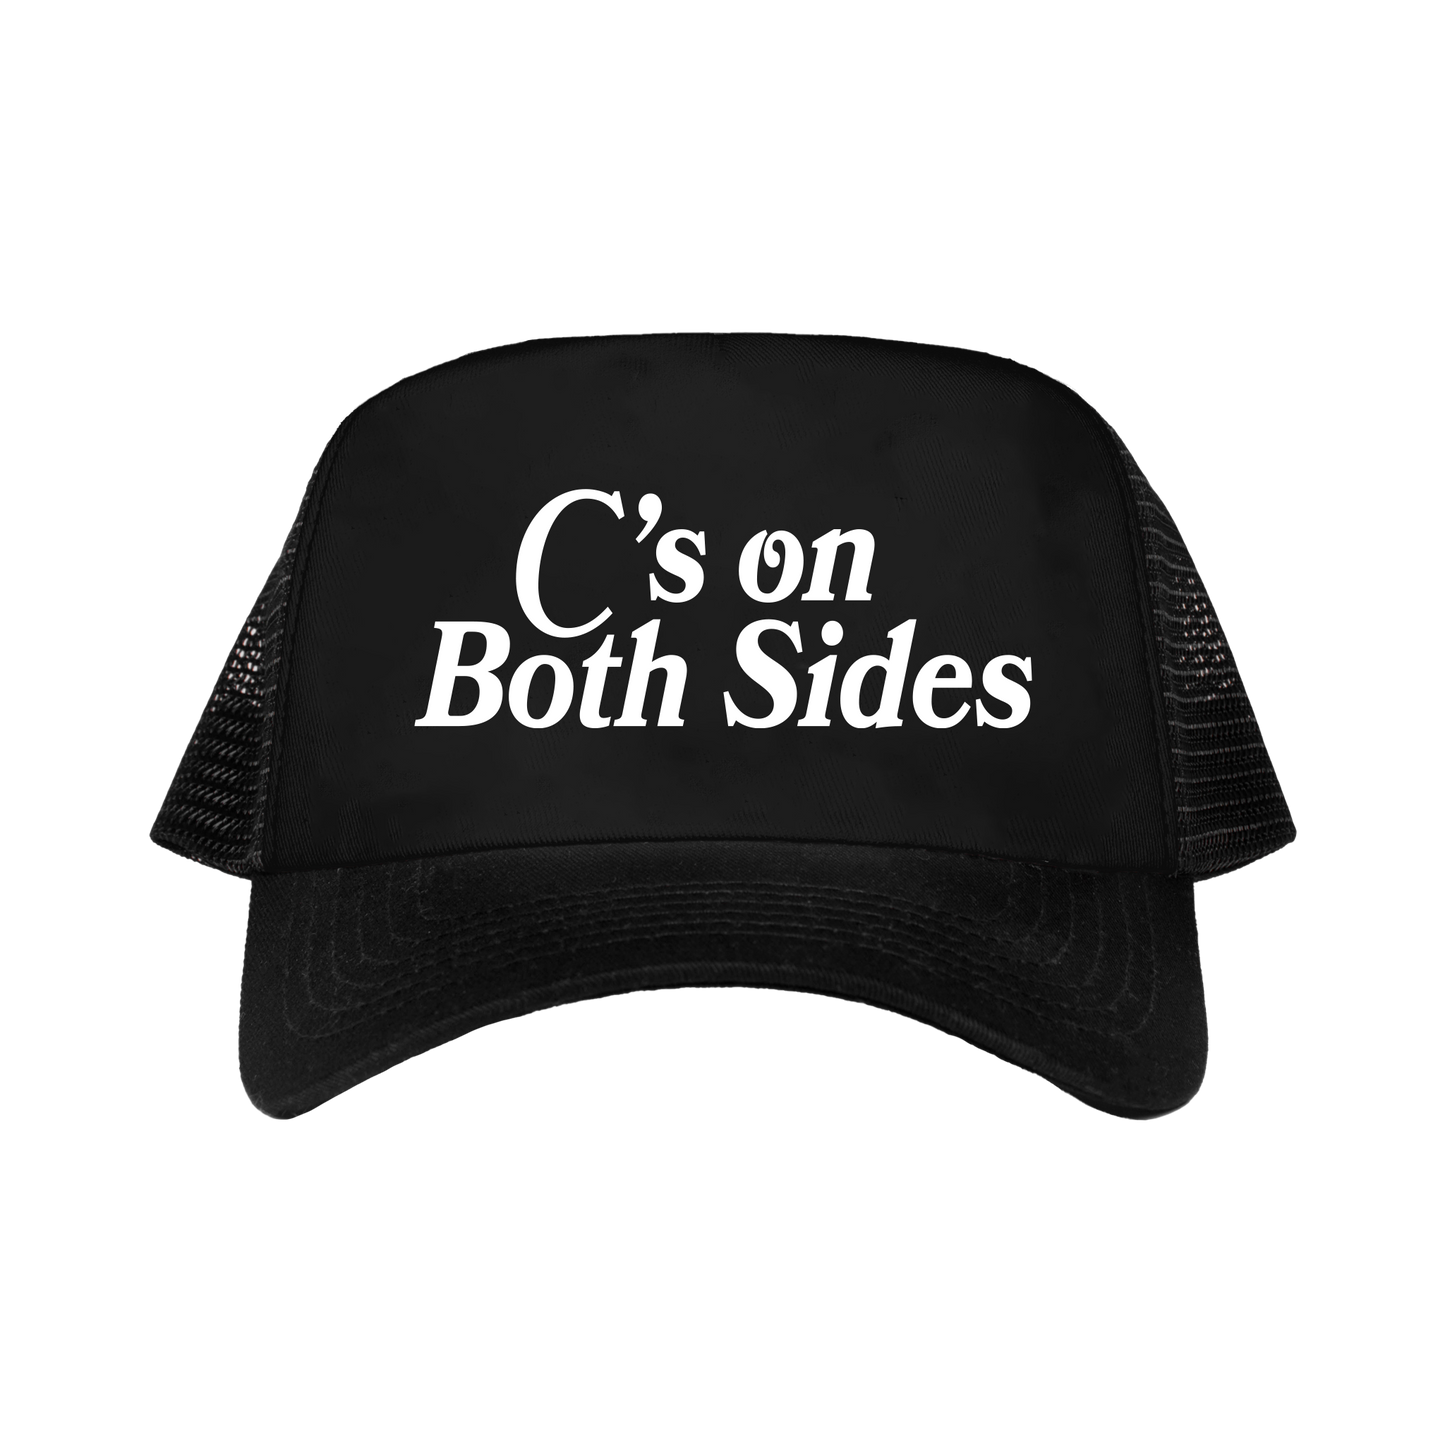 MARKET clothing brand BOTH SIDES TRUCKER HAT. Find more graphic tees, hats, beanies, hoodies at MarketStudios.com. Formally Chinatown Market. 